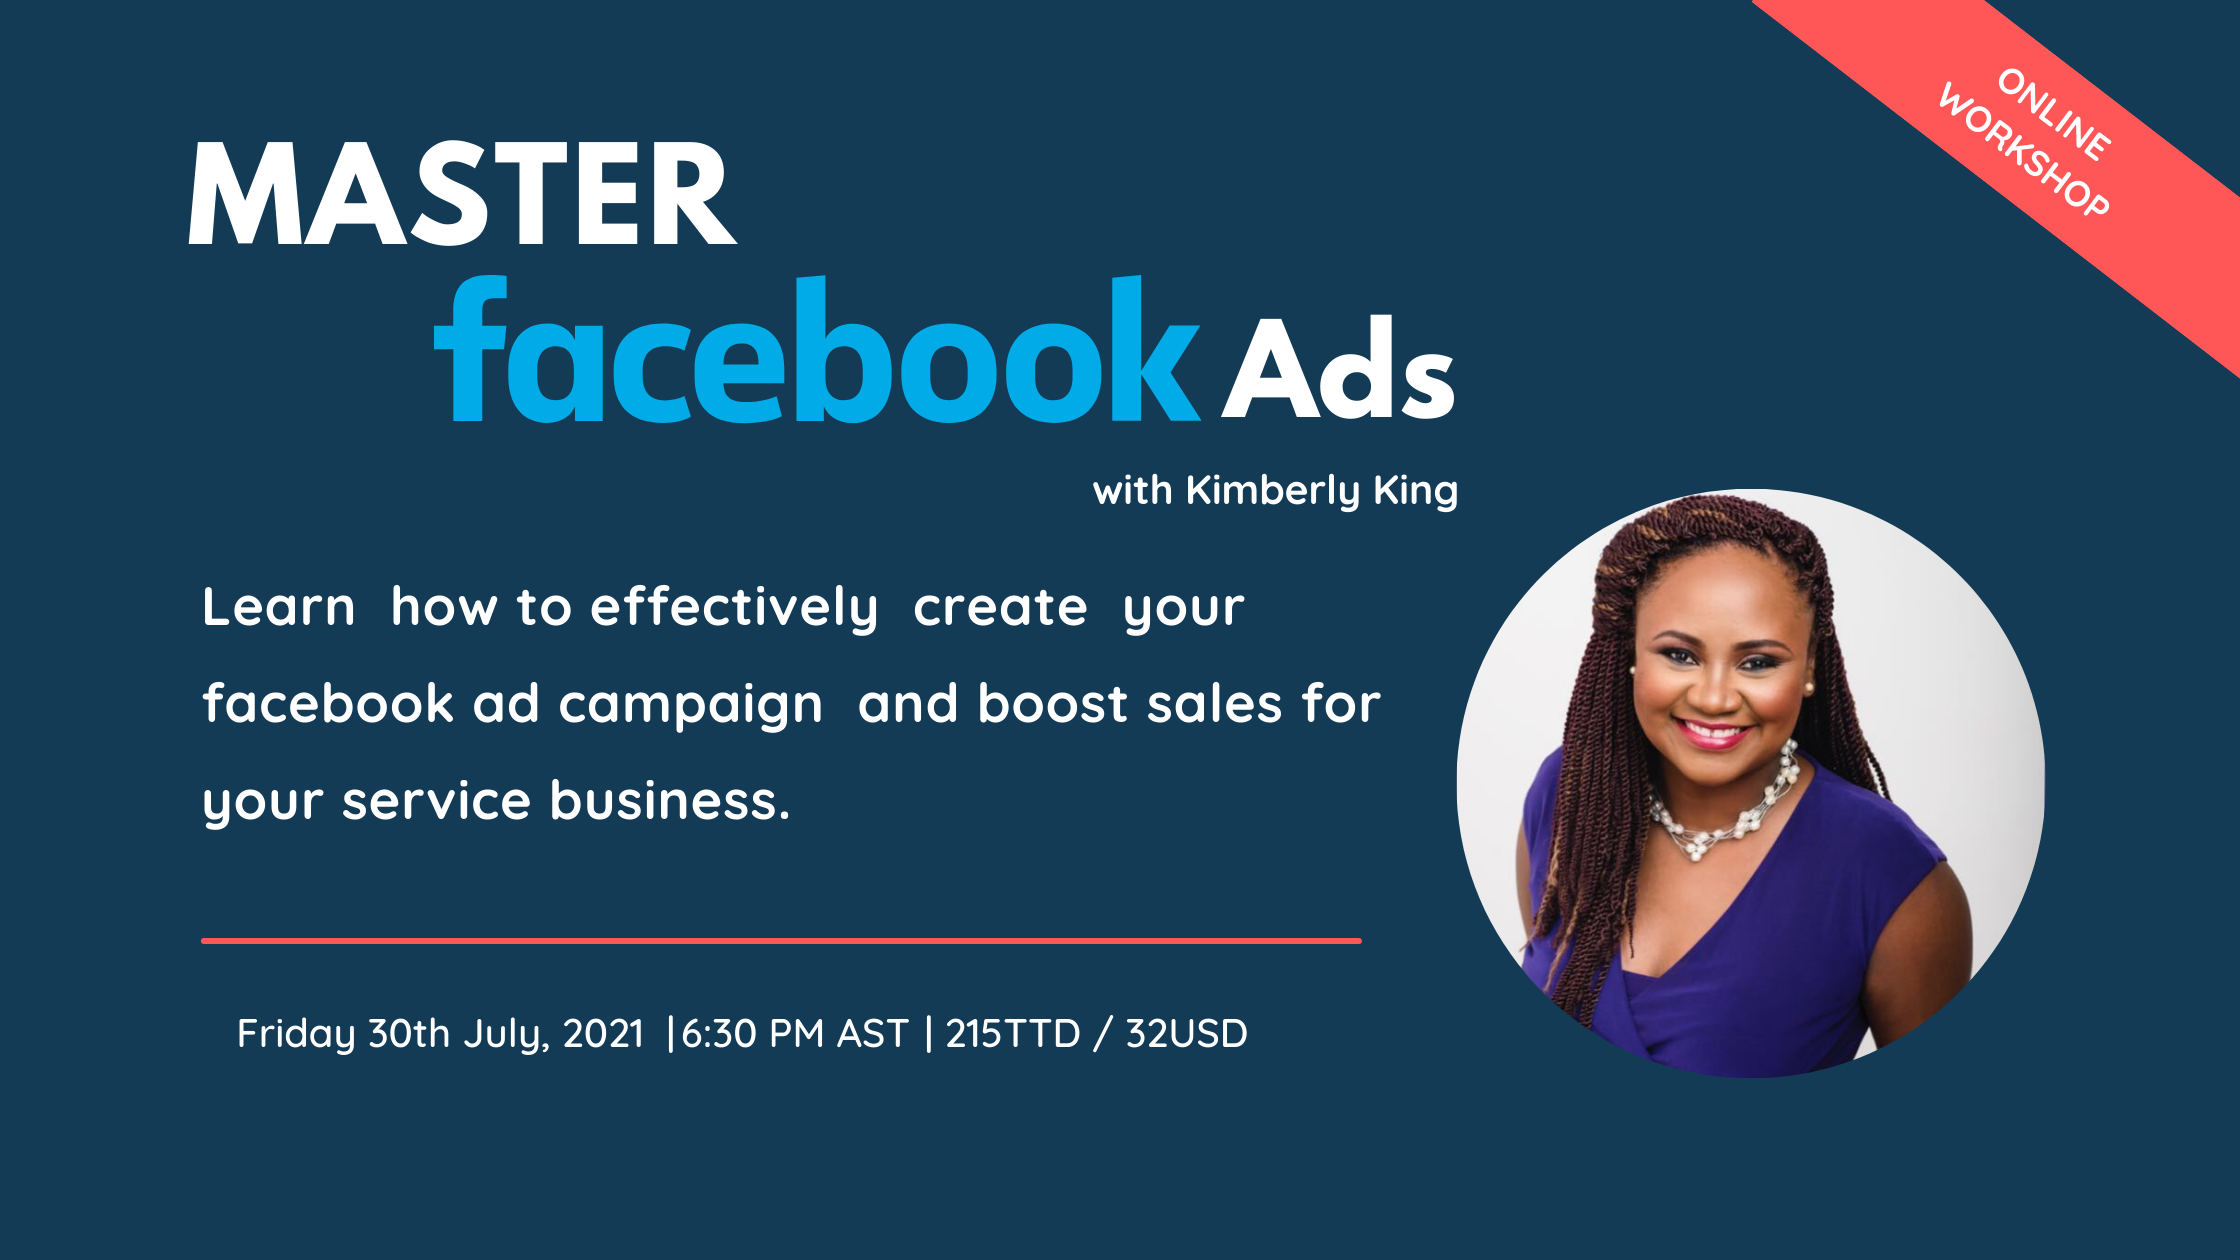 Master Facebook Ads with Kimberly King